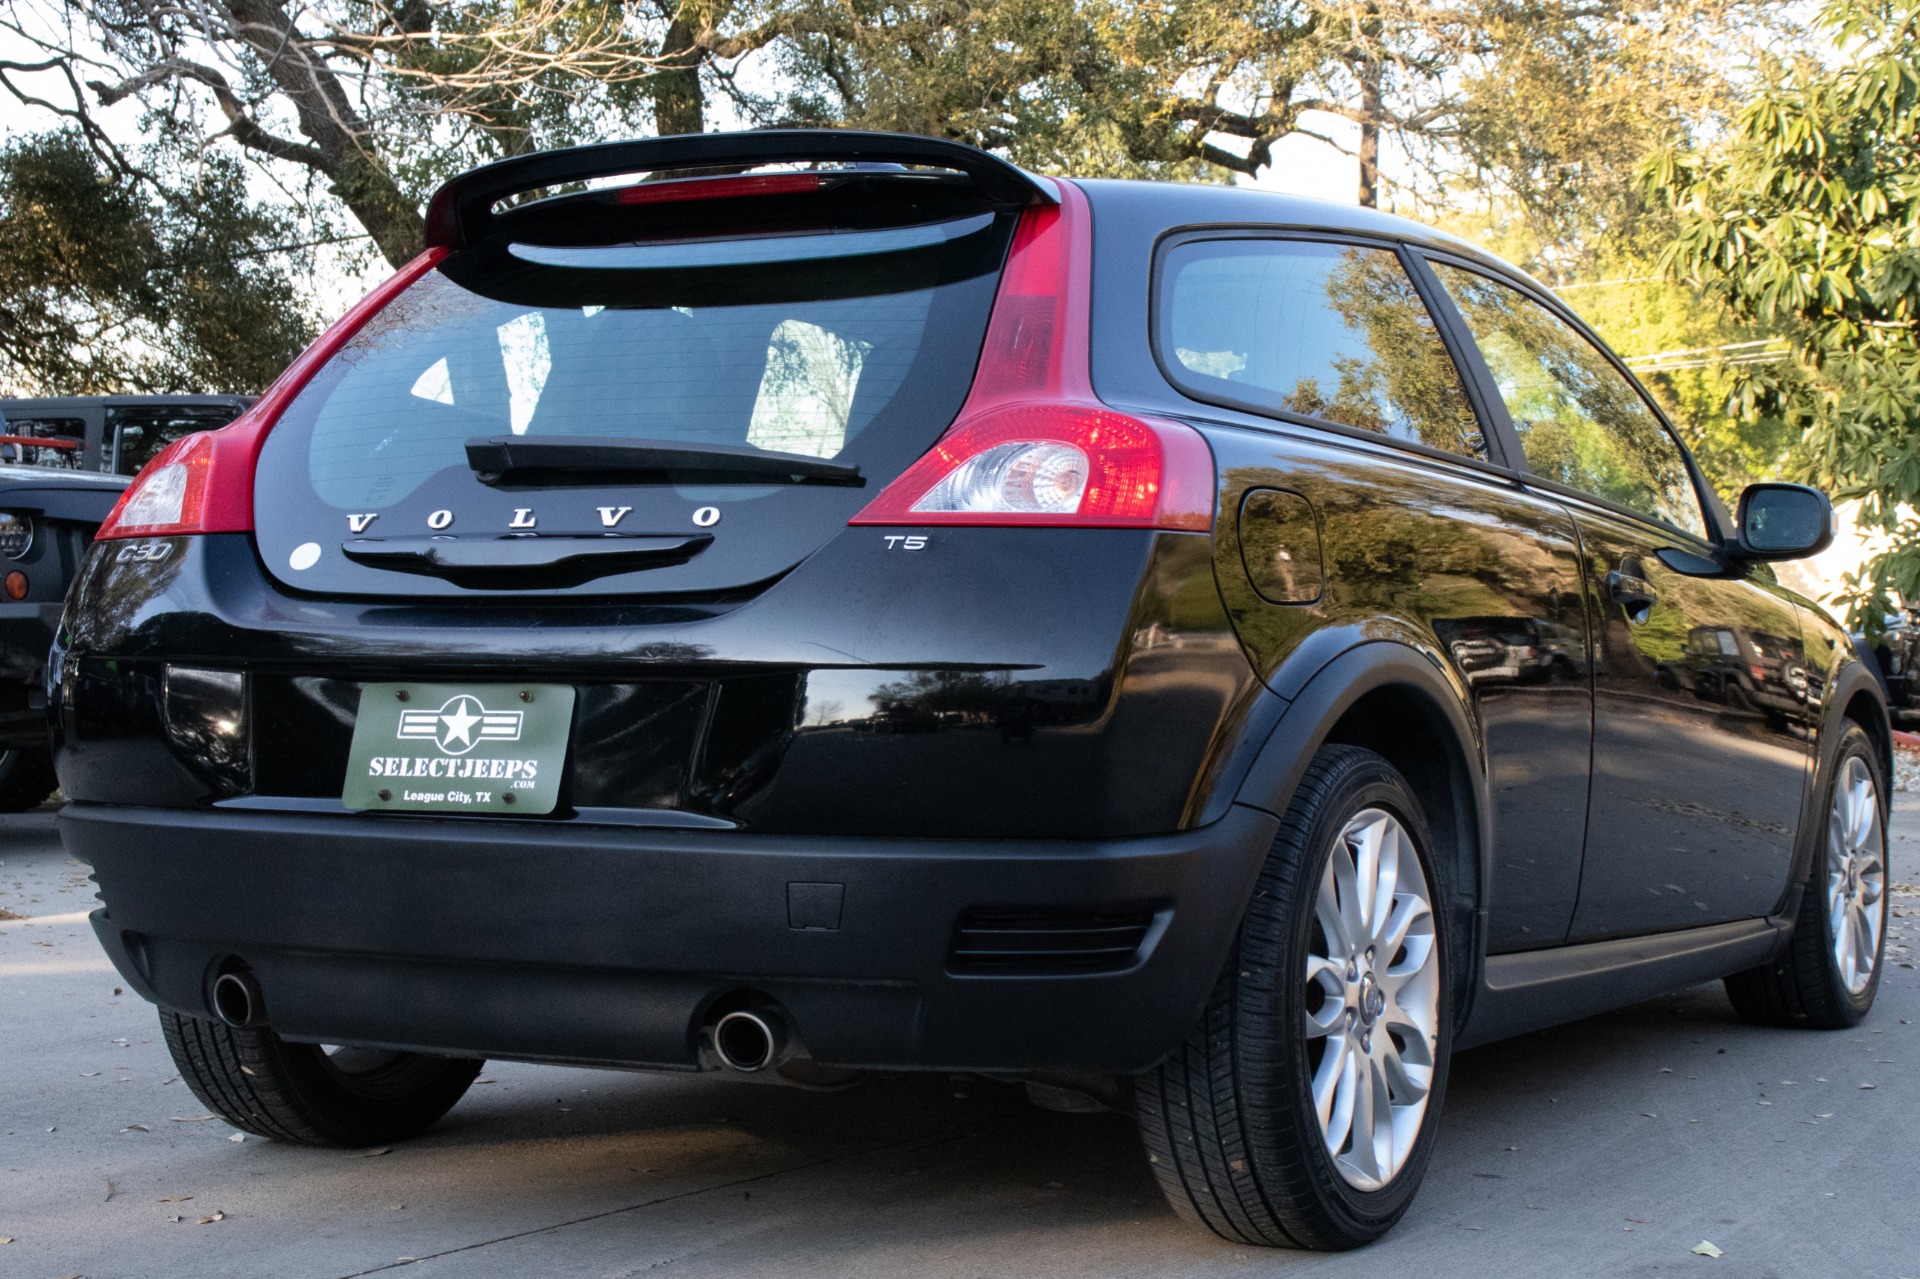 Used 2009 Volvo C30 T5 For Sale (5,995) Select Jeeps